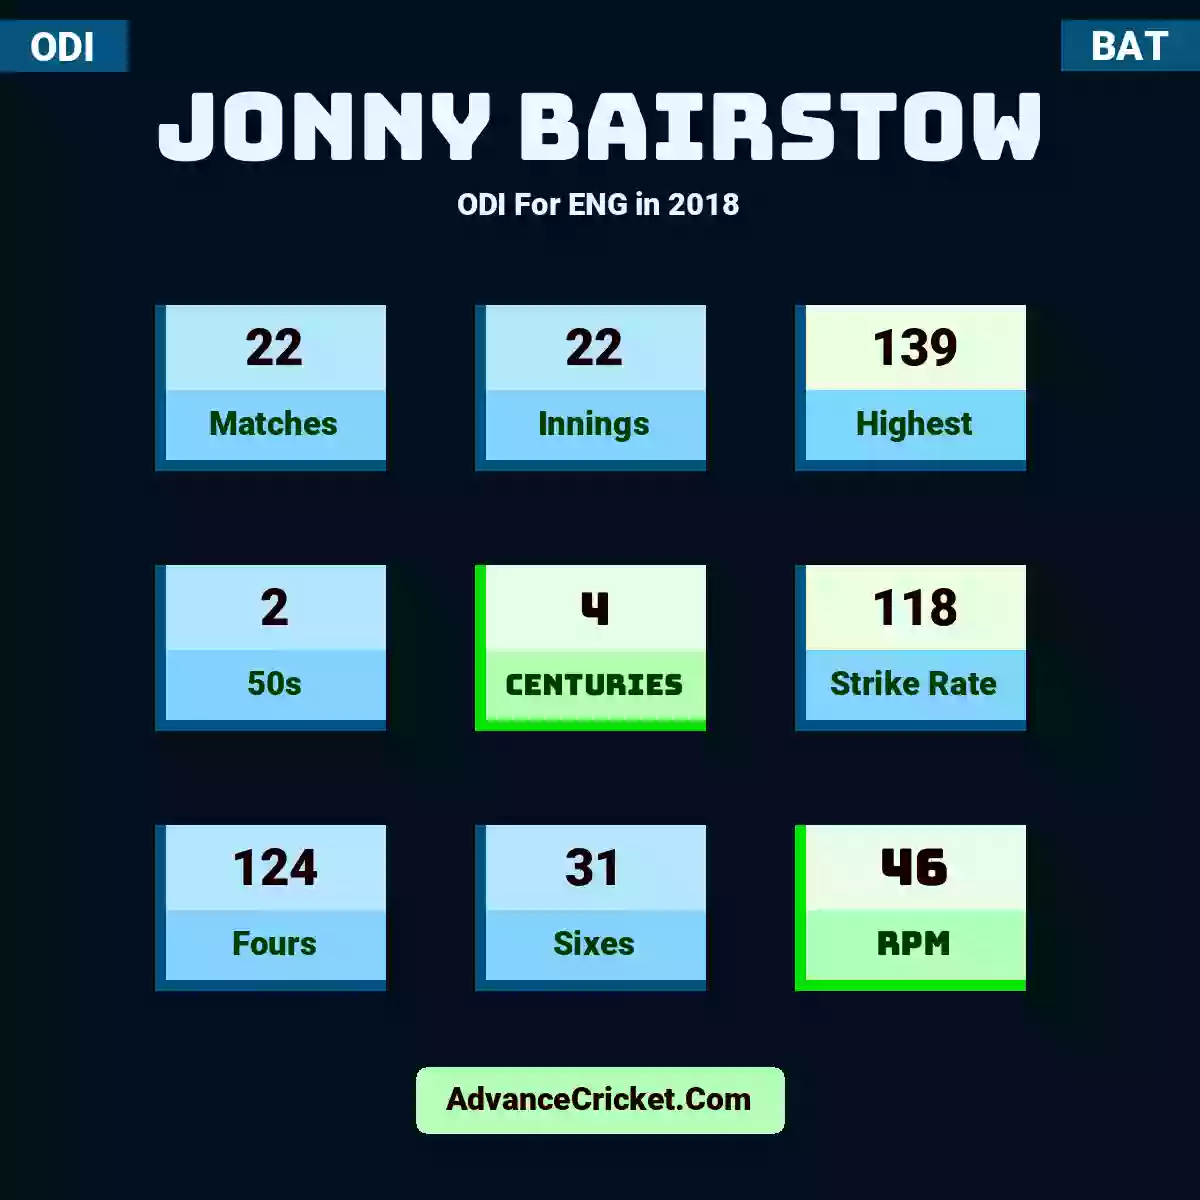 Jonny Bairstow ODI  For ENG in 2018, Jonny Bairstow played 22 matches, scored 139 runs as highest, 2 half-centuries, and 4 centuries, with a strike rate of 118. J.Bairstow hit 124 fours and 31 sixes, with an RPM of 46.